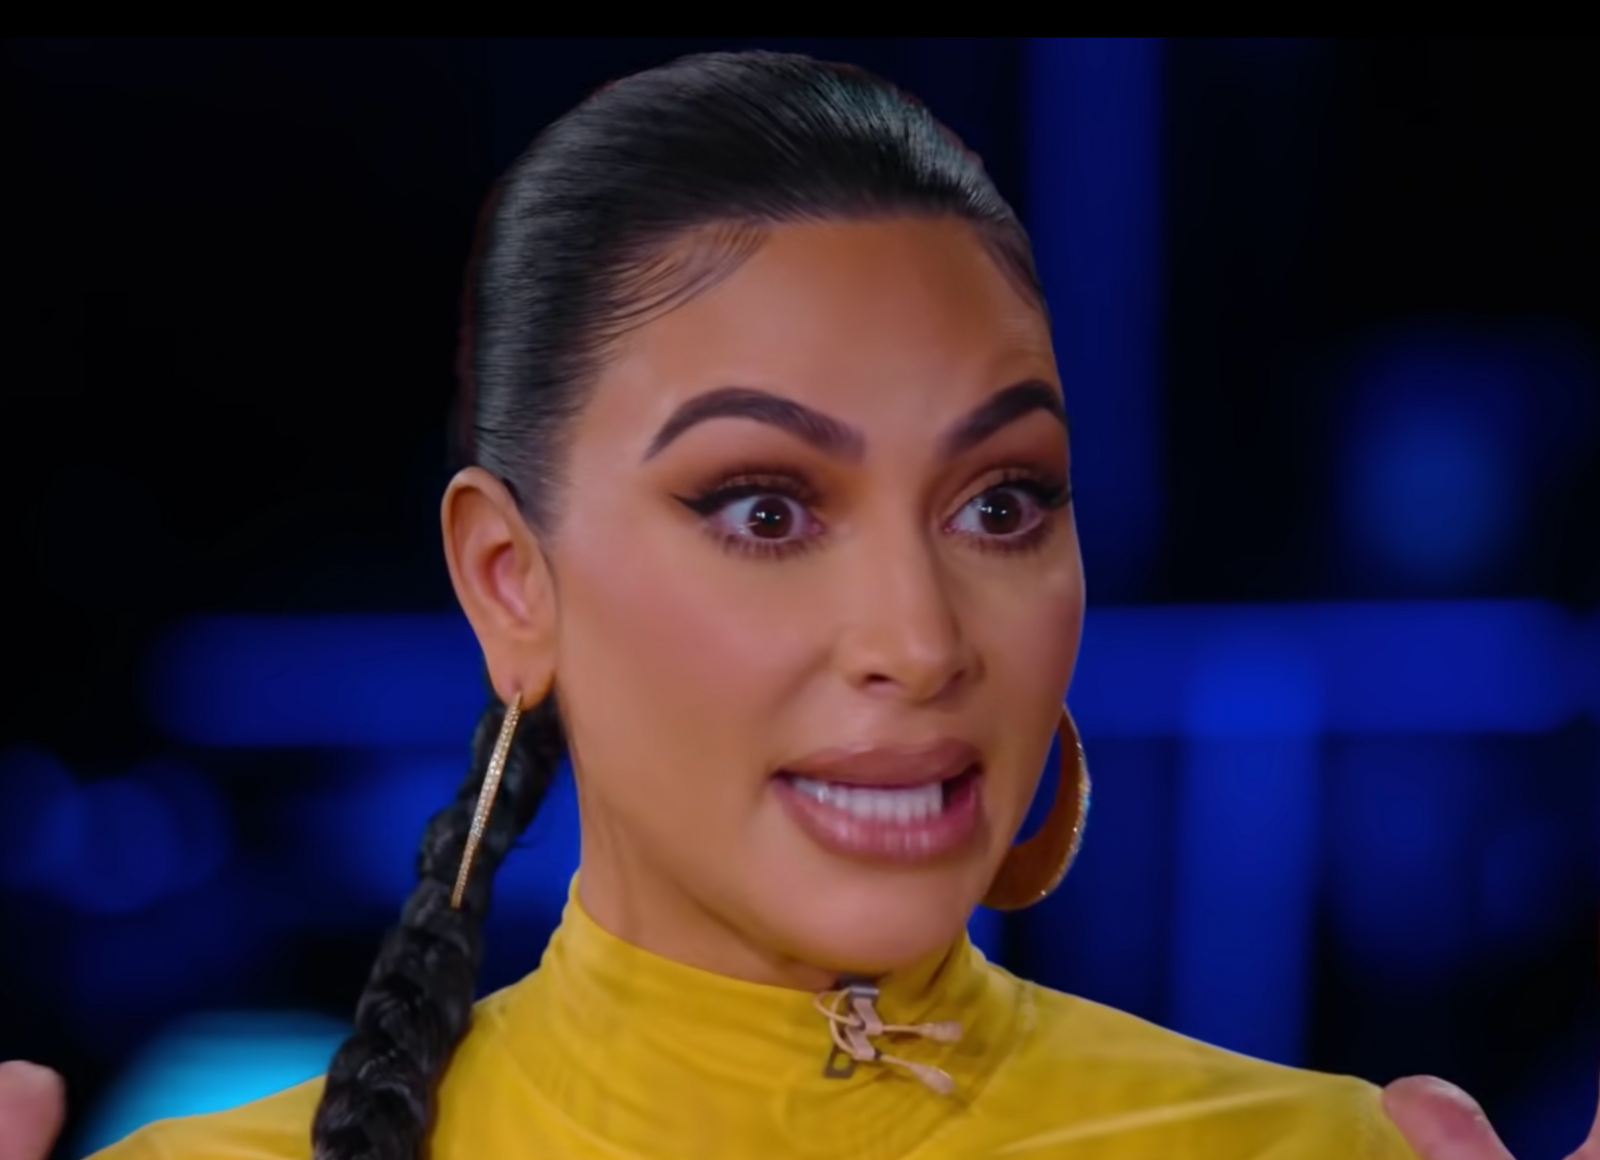 kim-kardashian-to-blame-for-paris-robbery-that-left-her-traumatized-for-life-suspect-reportedly-claims-pete-davidsons-ex-girlfriend-shouldnt-have-been-so-showy-on-social-media